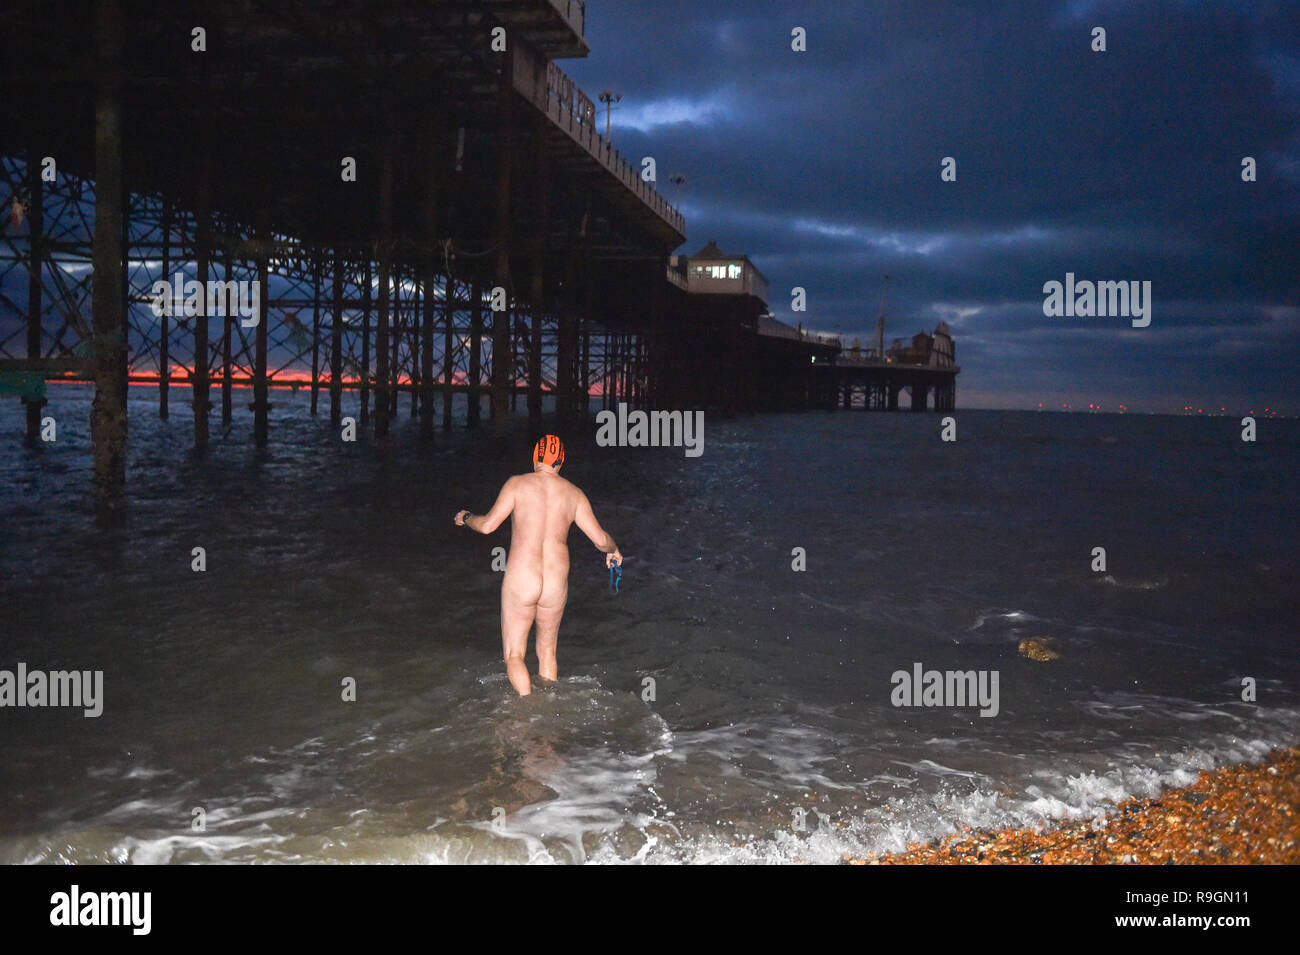 Brighton, UK. 25th Dec, 2018. This member of Brighton Swimming Club enjoys  an early Christmas morning skinny dip in the sea at sunrise . They are  Britains oldest swimming club, founded in